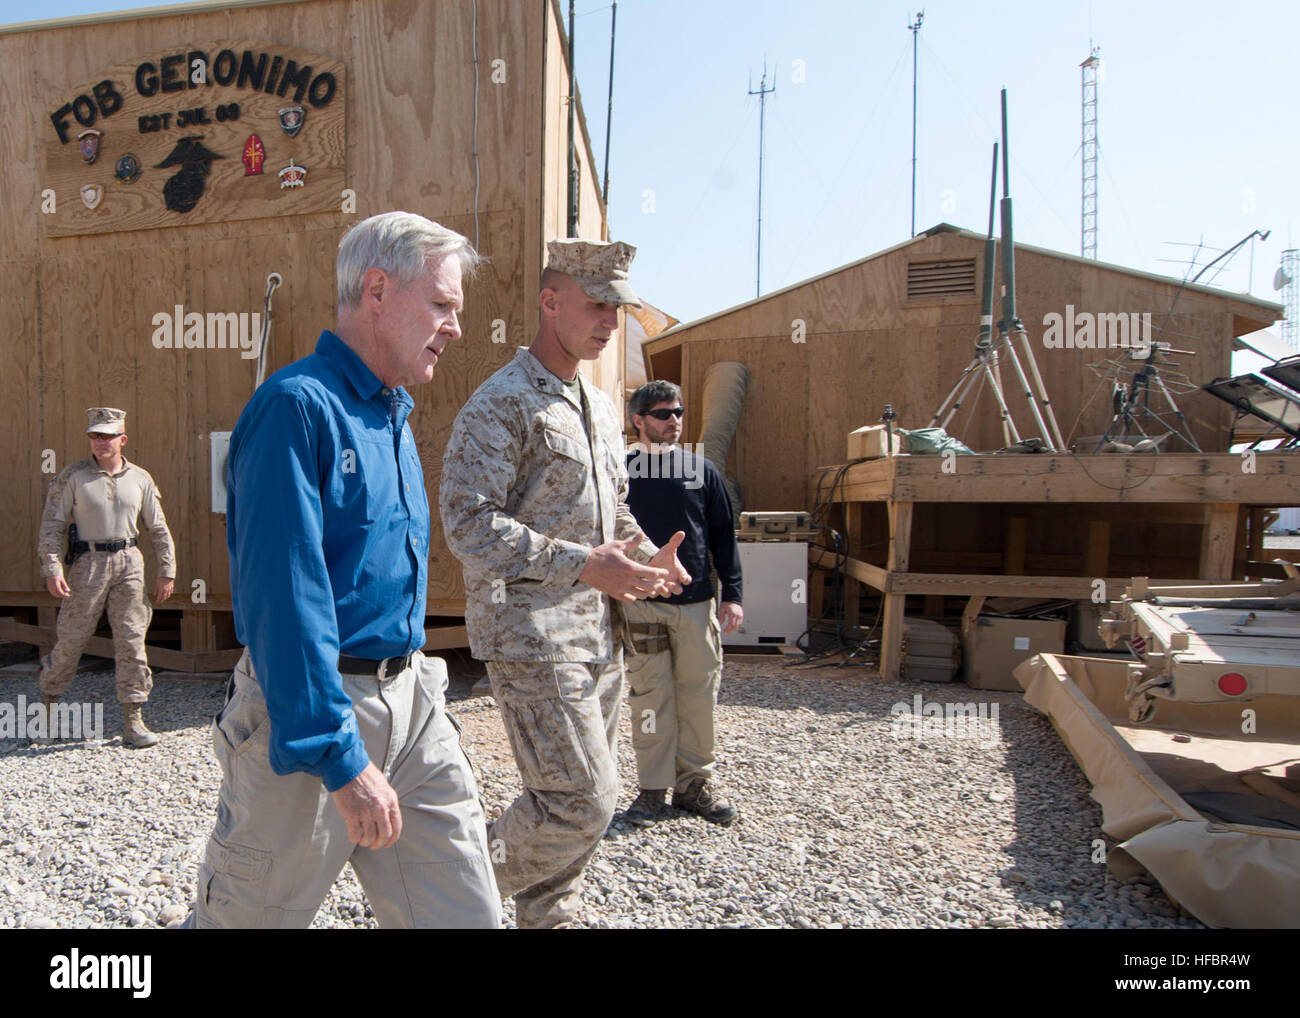 HELMAND PROVINCE, Afghanistan (Oct. 28, 2012) Secretary of the Navy (SECNAV) Ray Mabus observes expeditionary energy equipment at Forward Operating Base Geronimo, Helmand Province, Afghanistan. Mabus met with senior leaders, Sailors and Marines to discuss security in the region and to thank them for their service and sacrifice. America's Sailors are Warfighters, a fast and flexible force deployed worldwide. Join the conversation on social media using #warfighting. (U.S. Navy photo by Chief Mass Communication Specialist Sam Shavers/Released) 121028-N-AC887-005 Join the conversation http://www.f Stock Photo